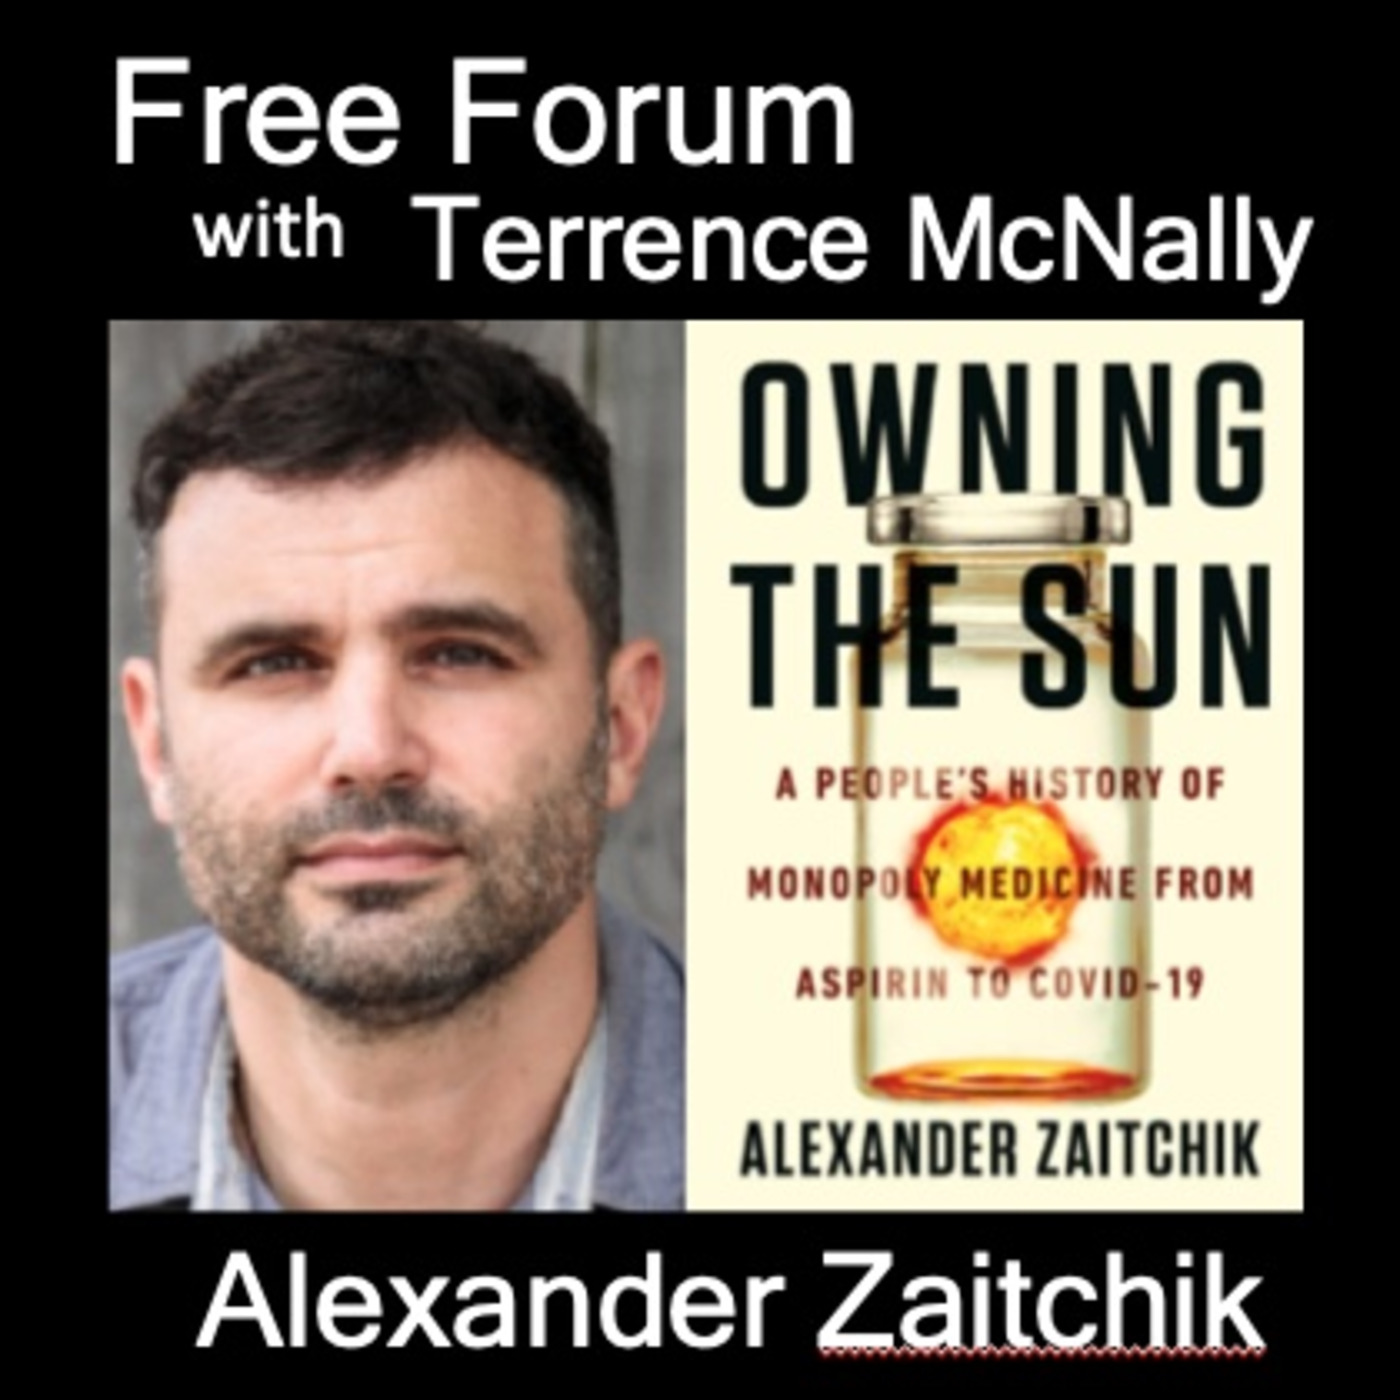 Episode 582: Taxpayers fund drug research. Corporations reap obscene profits from “our” discoveries. ALEXANDER ZAITCHIK, OWNING THE SUN:A People's History of Monopoly Medicine